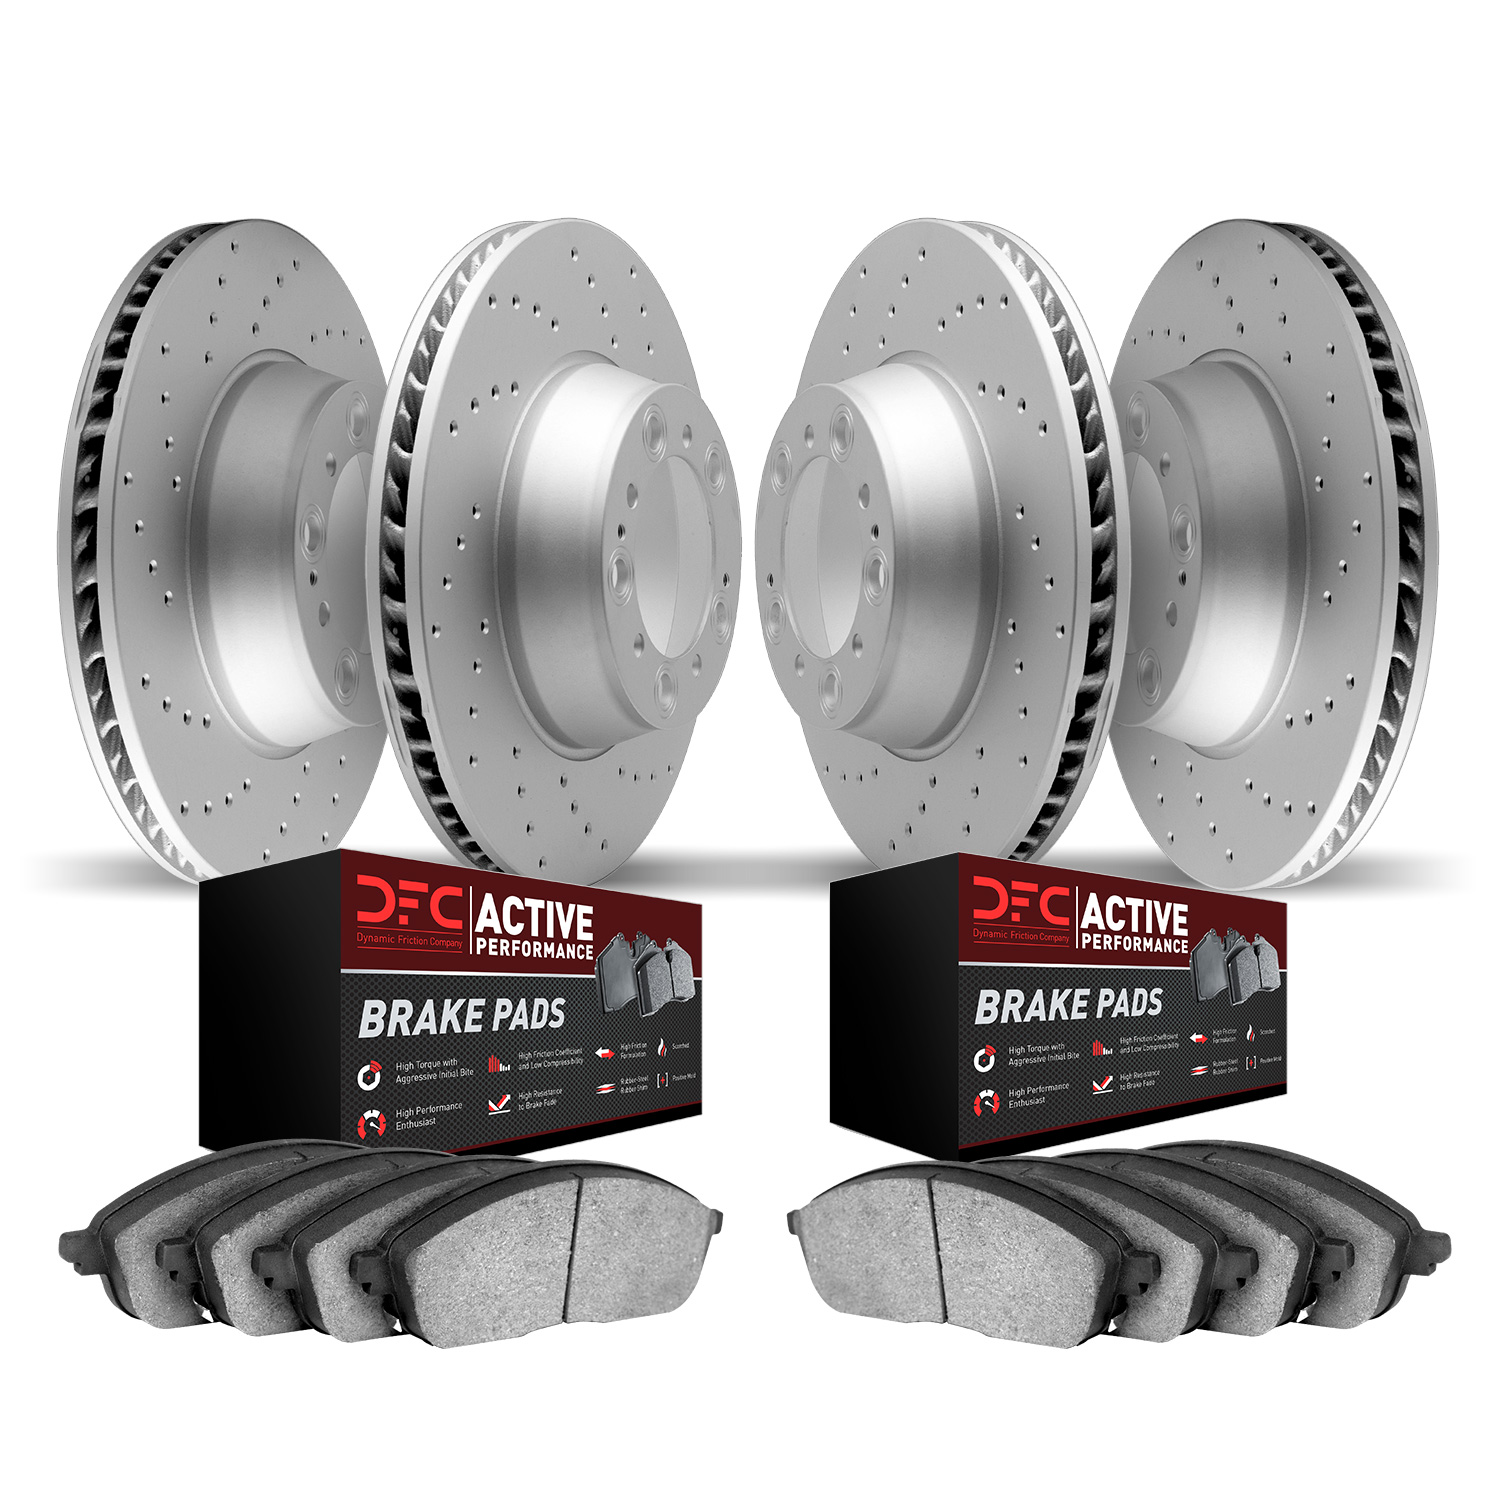 2704-31080 Geoperformance Drilled Brake Rotors with Active Performance Pads Kit, 2011-2012 BMW, Position: Front and Rear